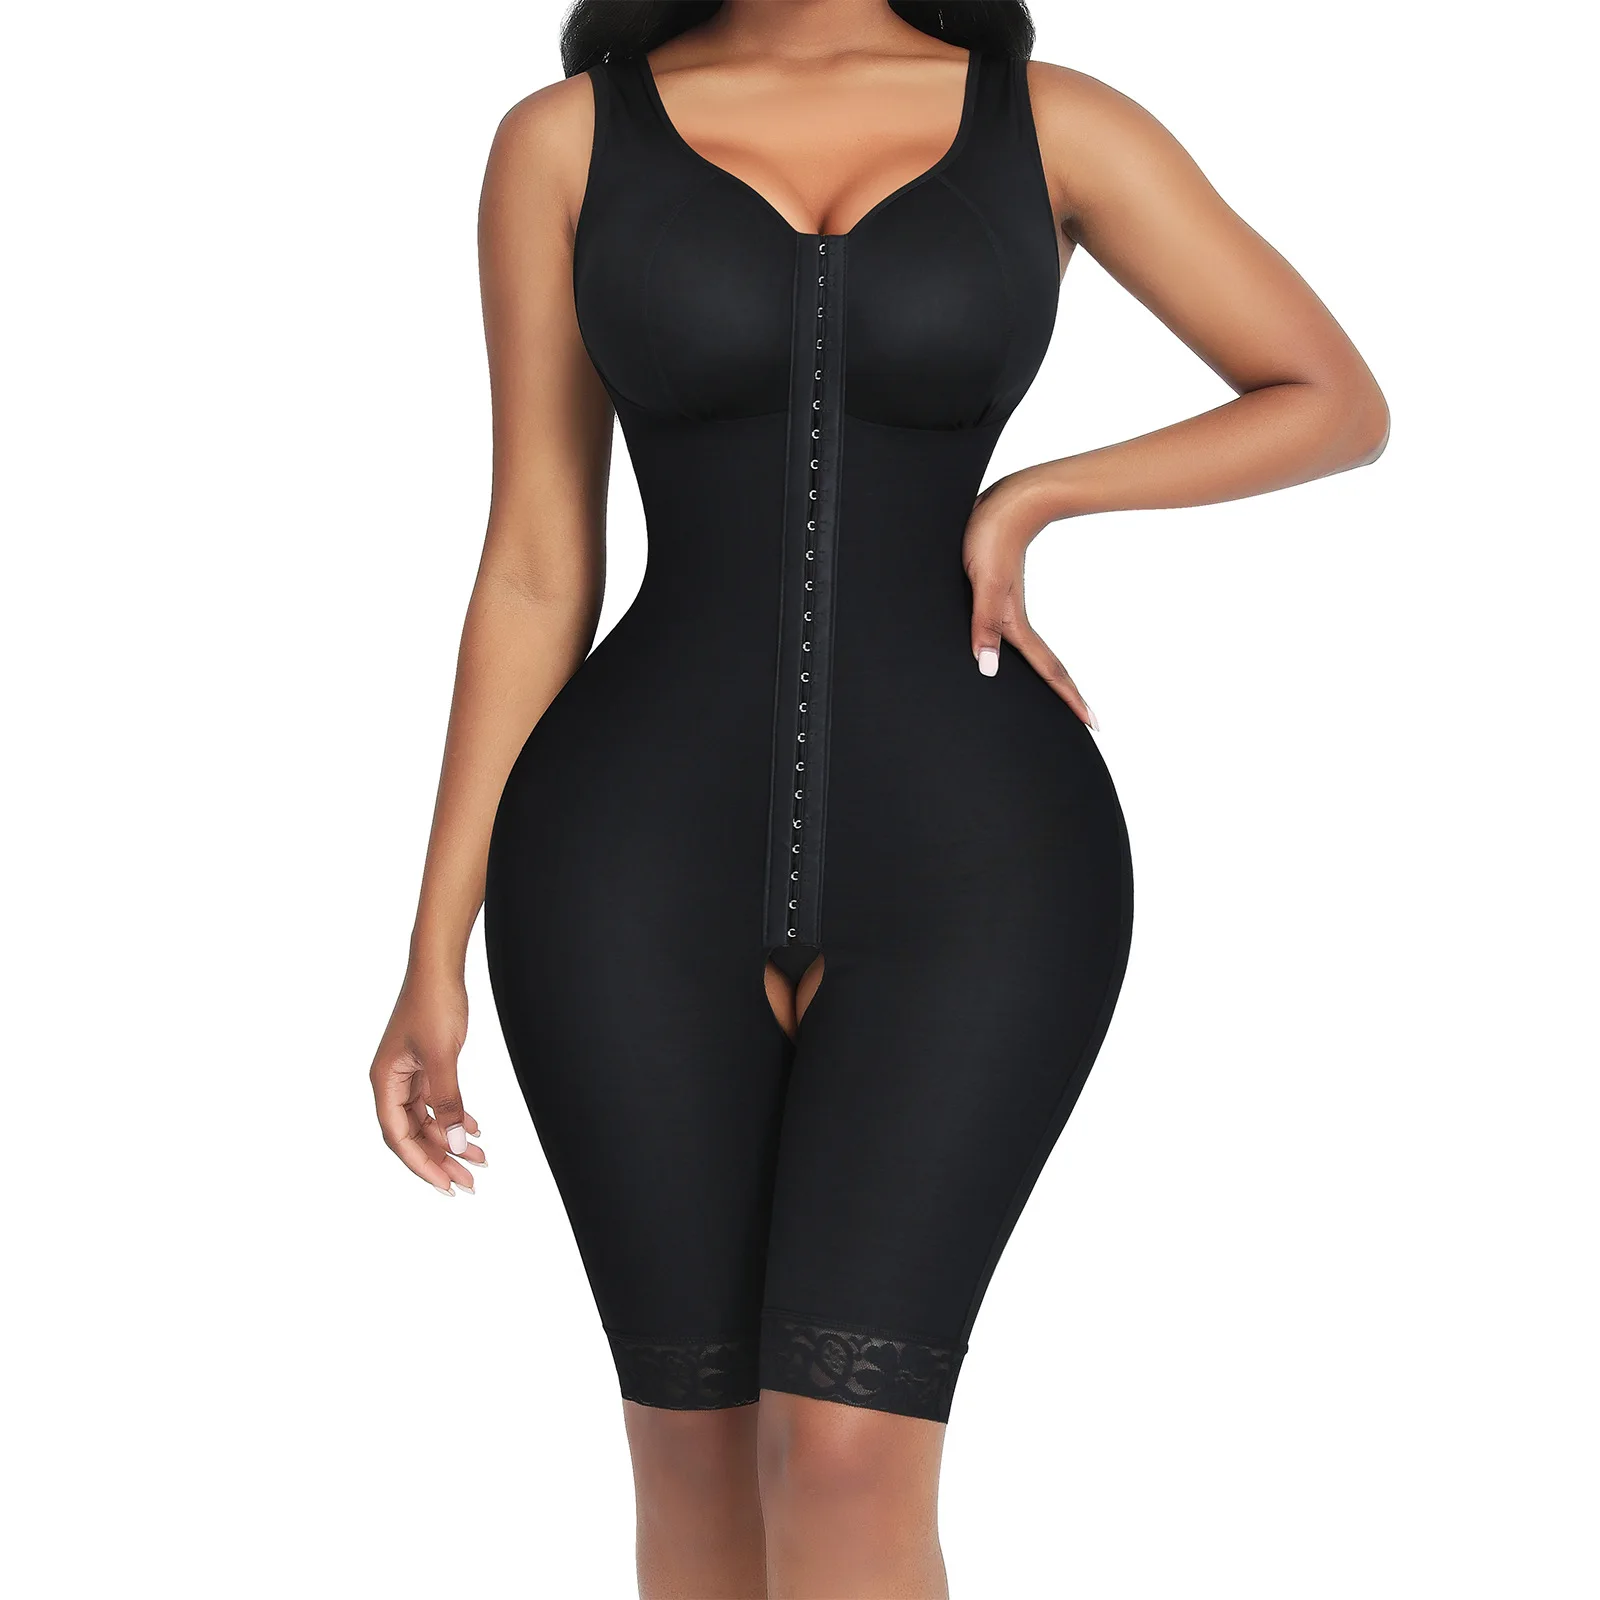 Anti-bacterial Powerful Breasted Buckle Lift Compression Underwear Body Shaping Raphene Crotch Plus Size Women Clothing Shapewea